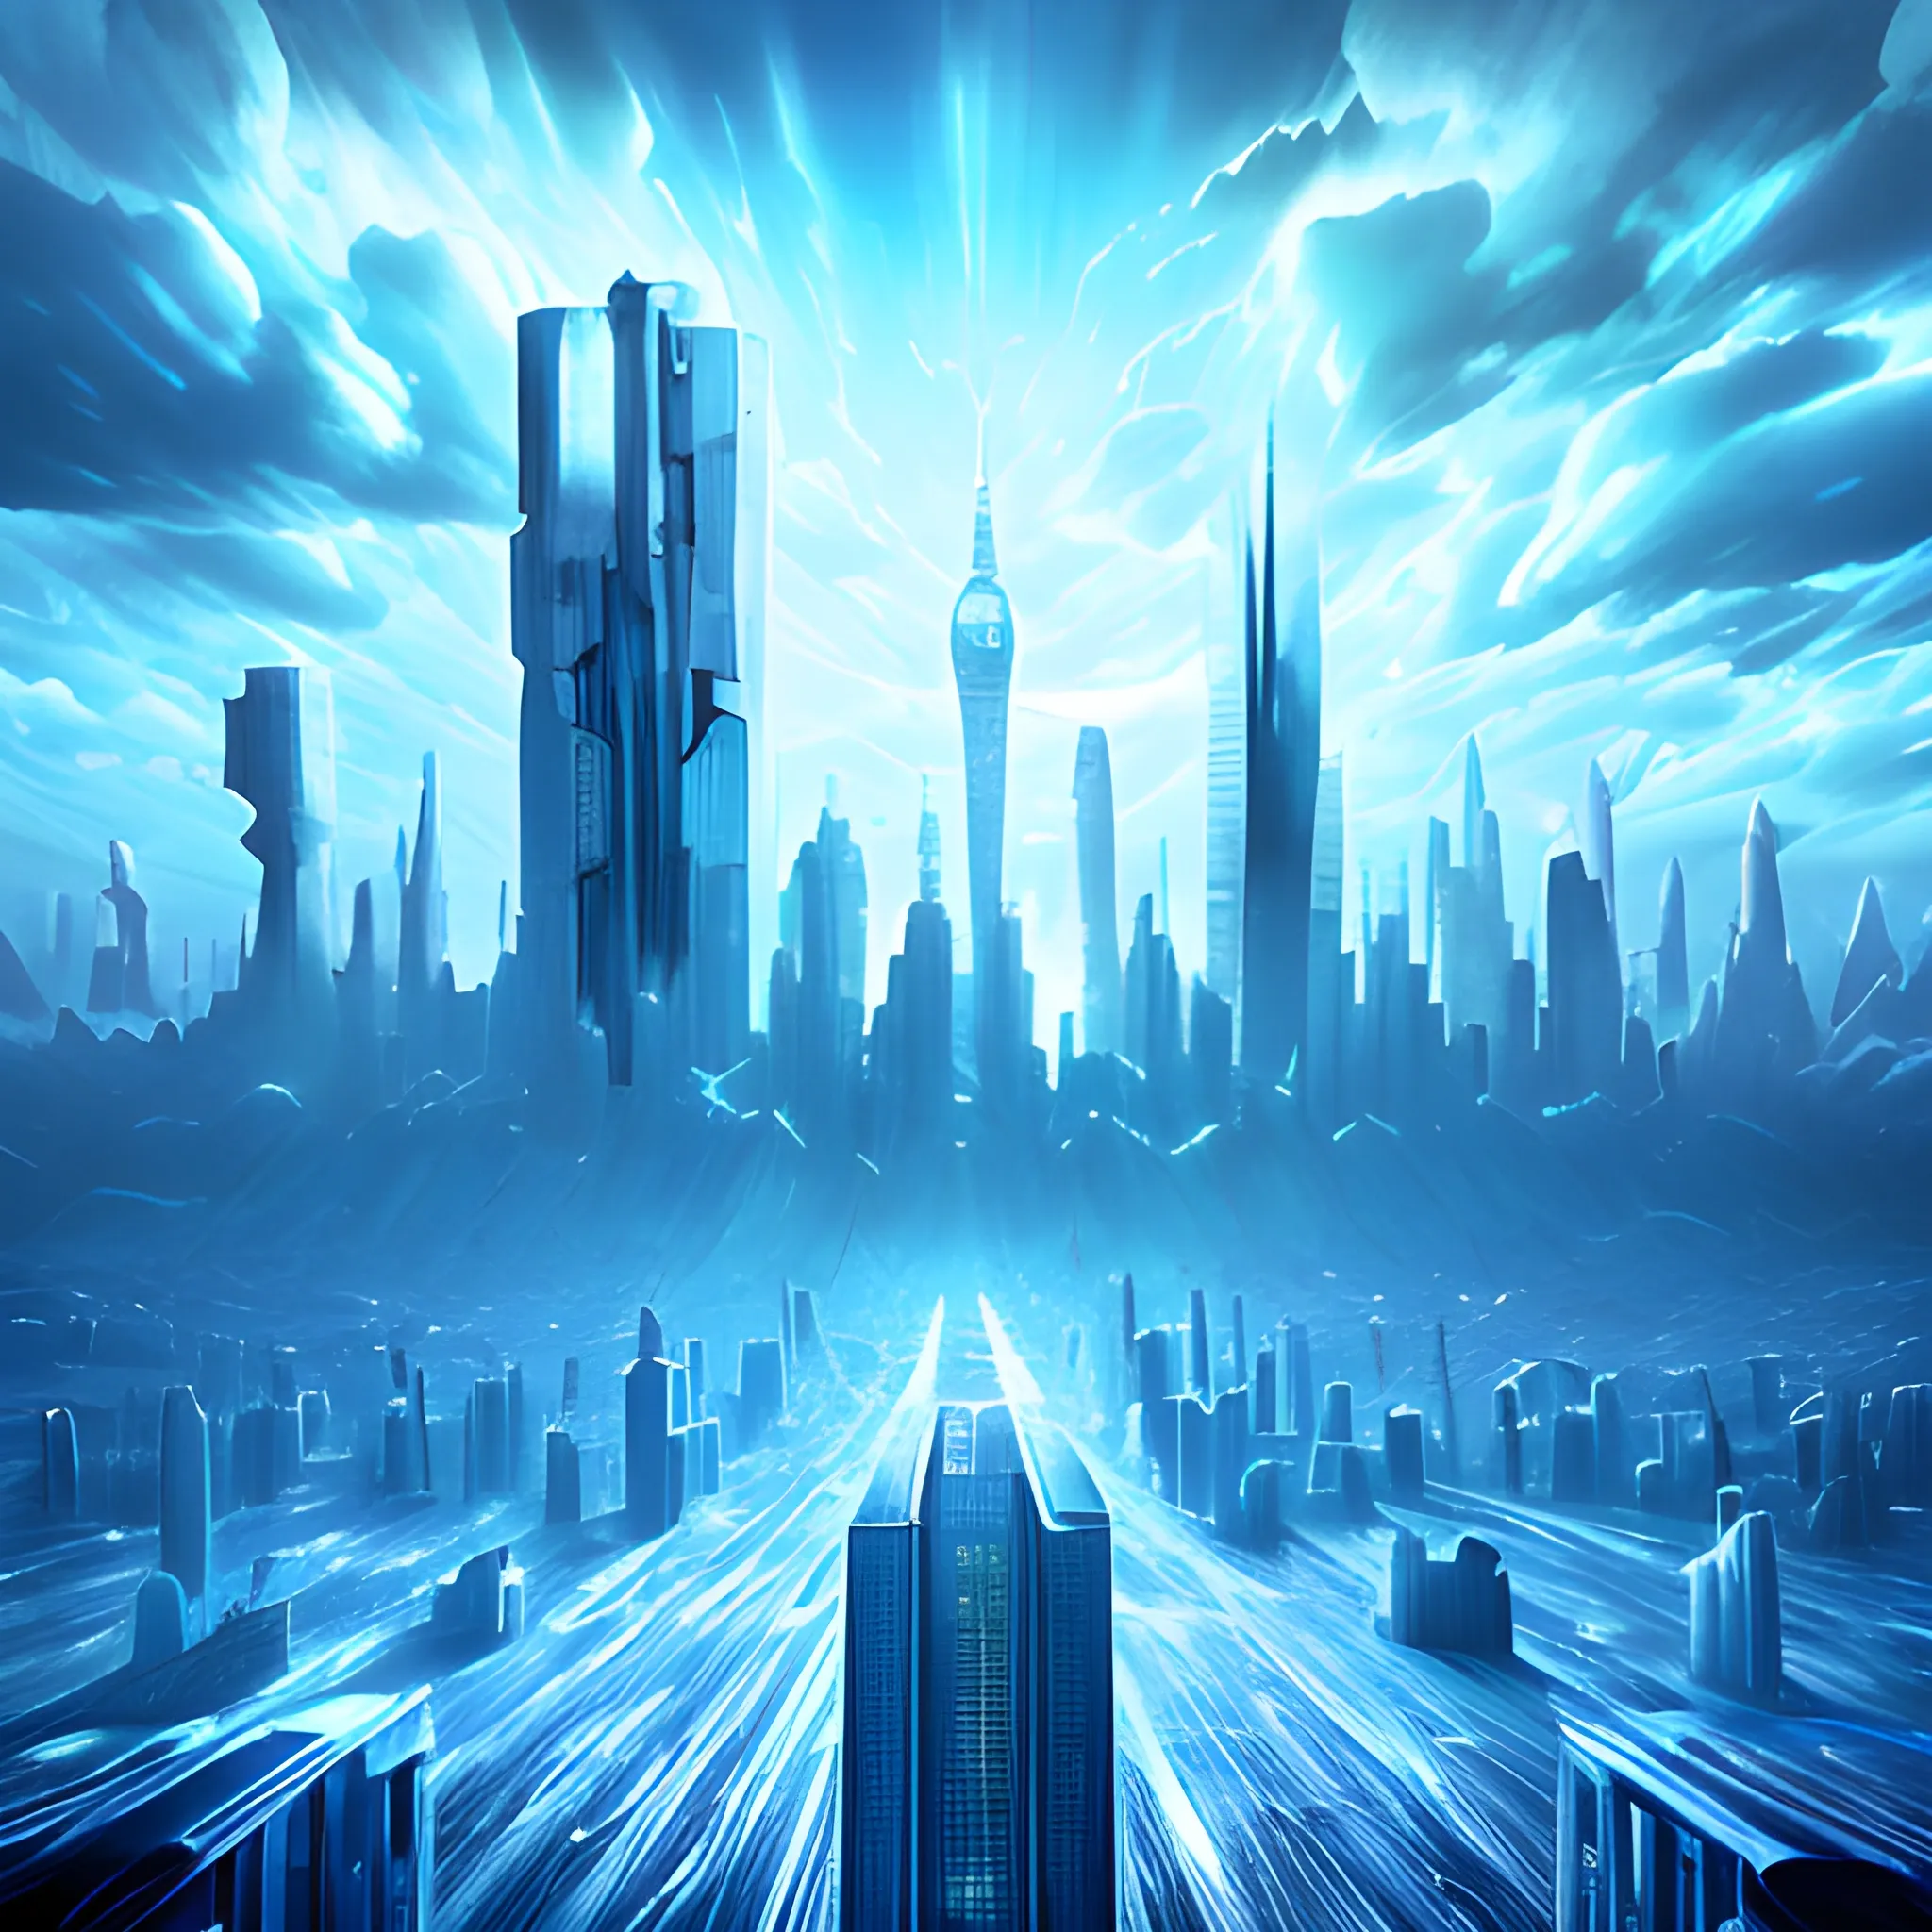 Futuristic city landscape. clouds. blue ice style of John Baeder style of David Hare style of Don Maitz american beauty film style using a happy writing style esthetic sony hdw-f900